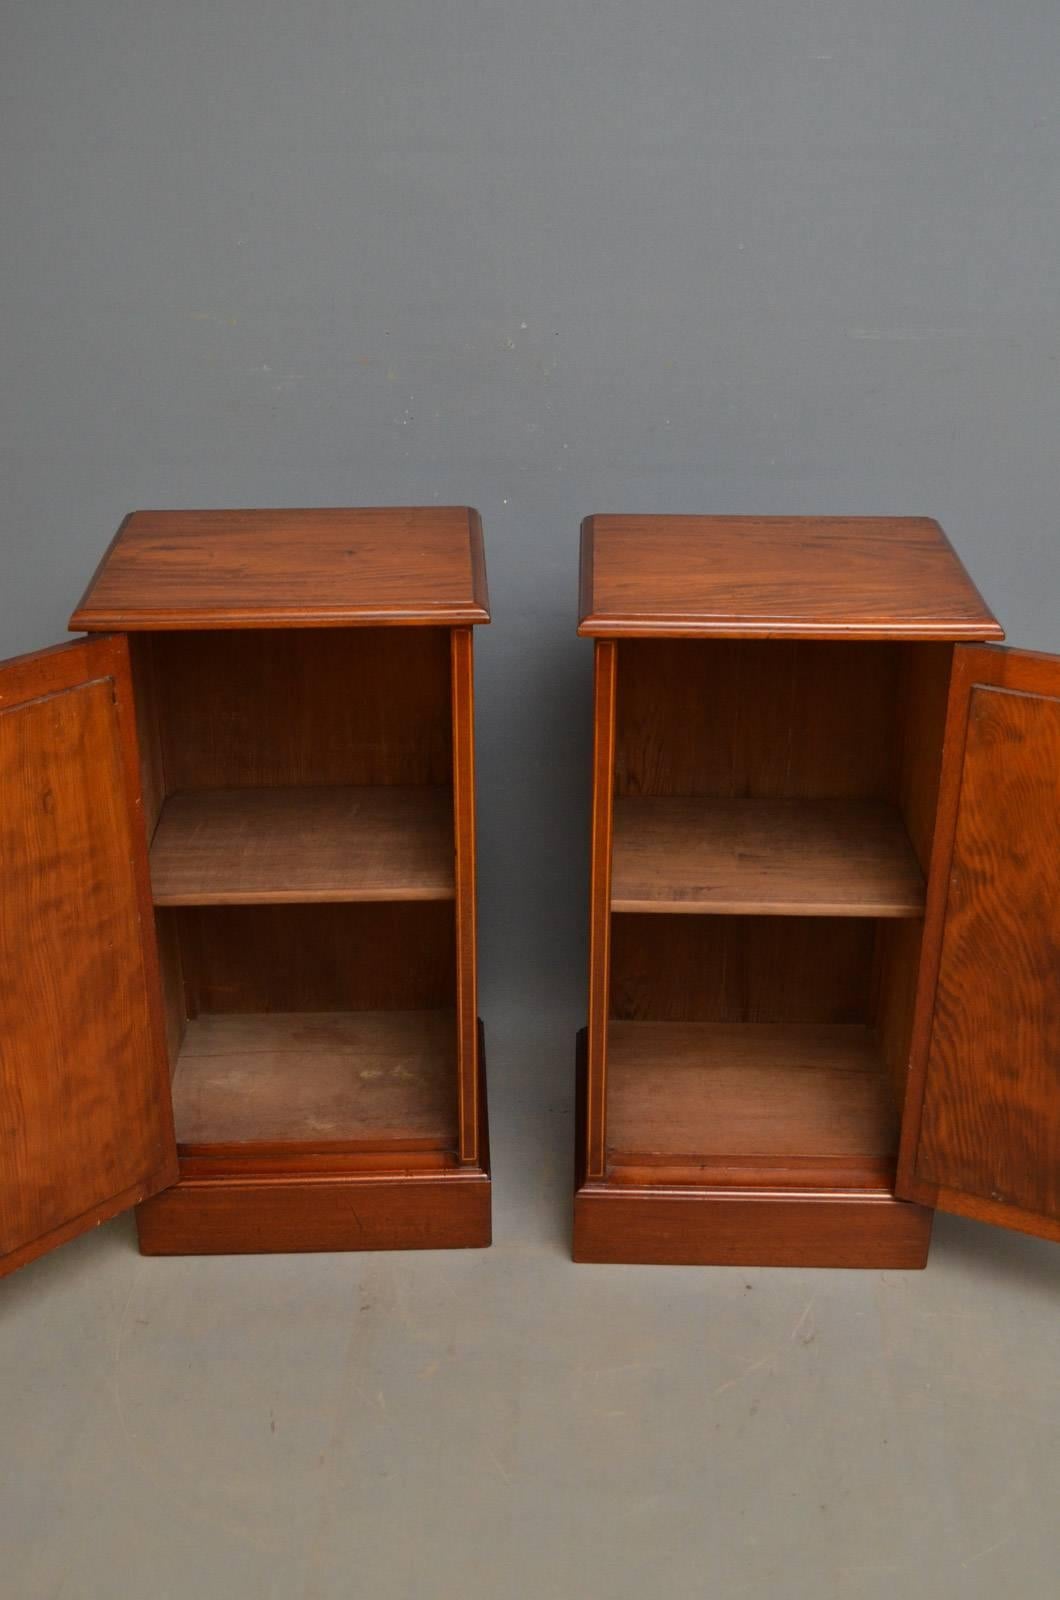 Early 20th Century Edwardian Mahogany Bedside Cabinets by Maple & Co.